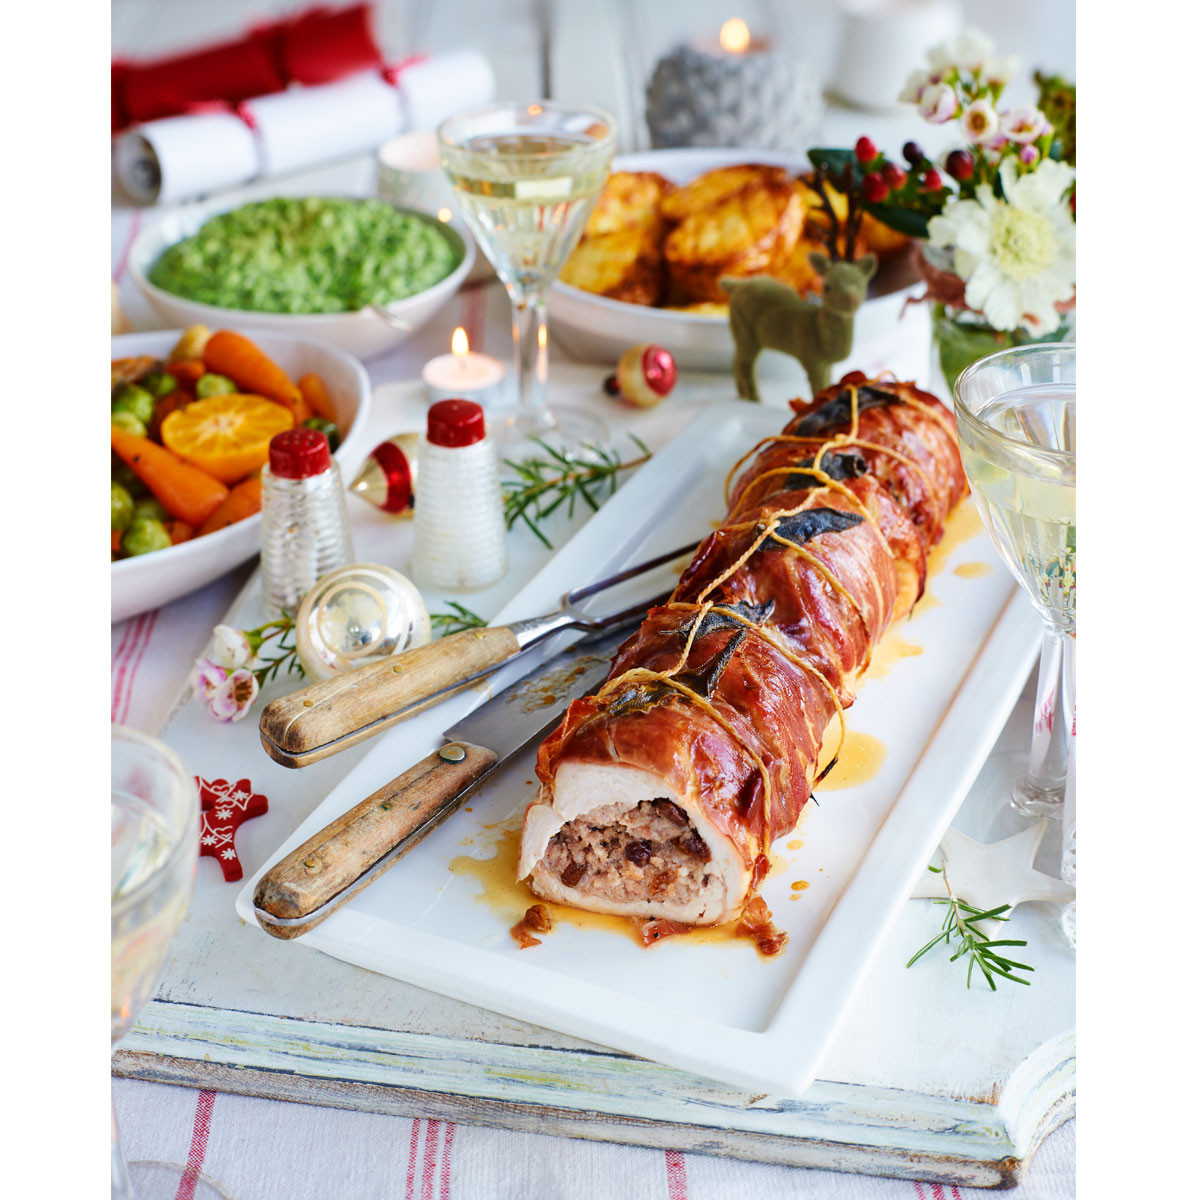 Simple Christmas Dinners
 Your easy Christmas dinner time plan Good Housekeeping